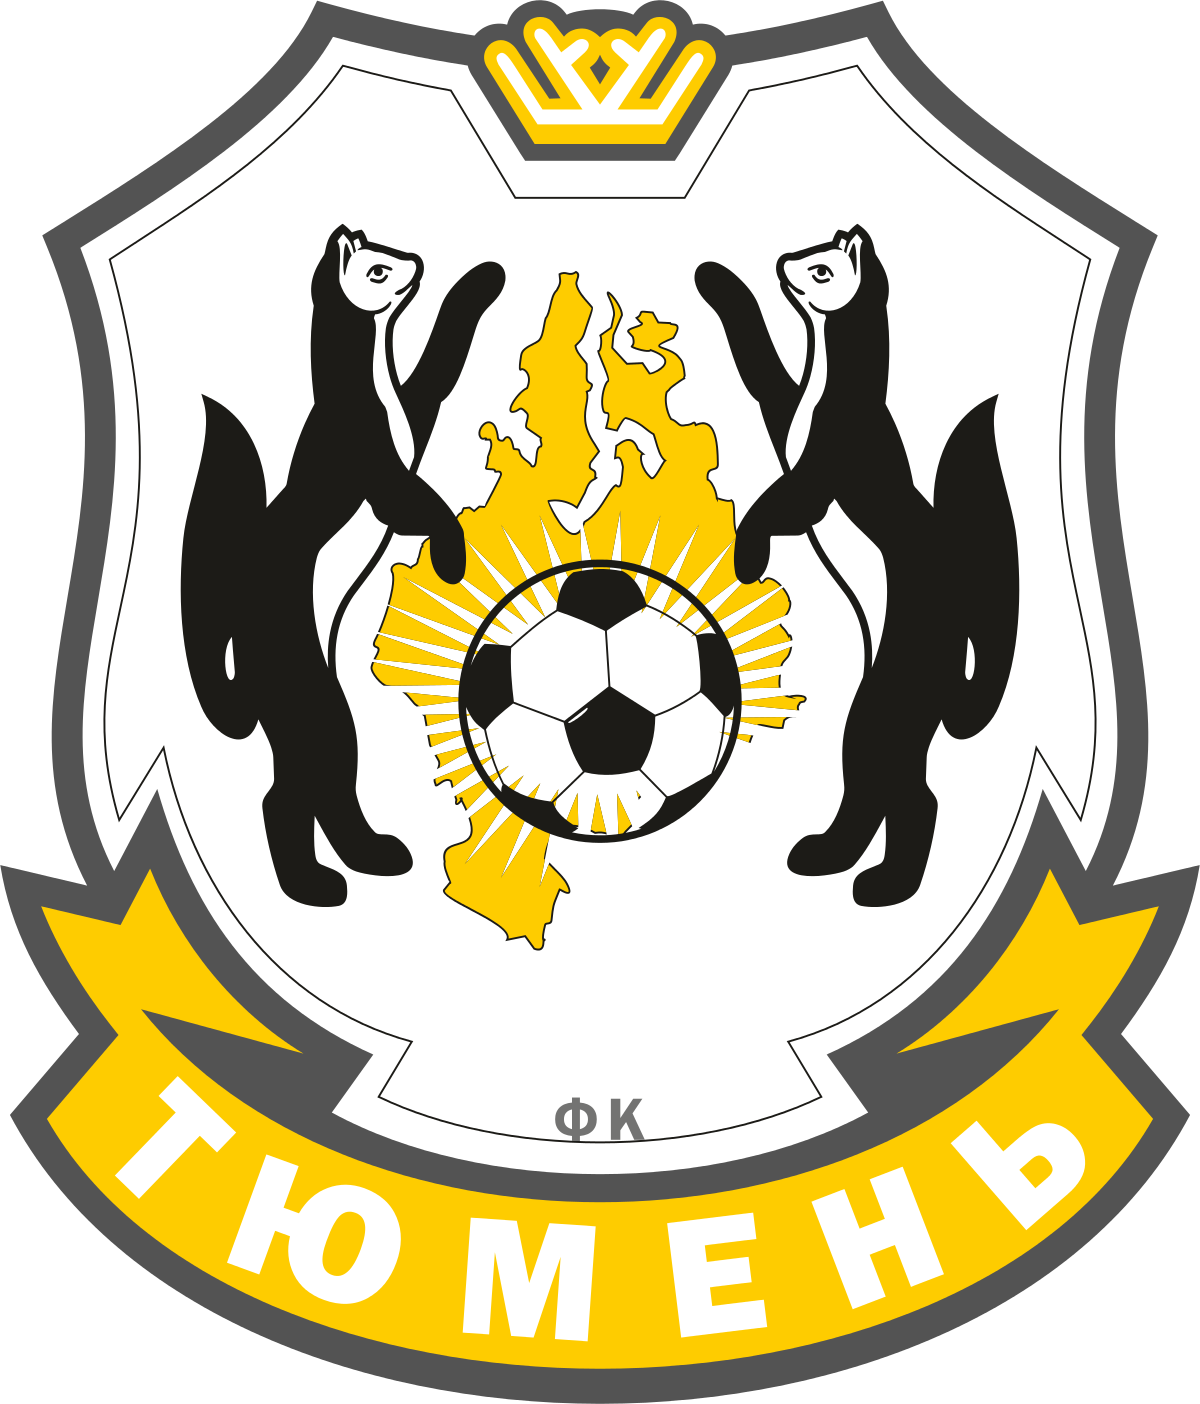 Club logo Tyumen FC the one who participates in the event